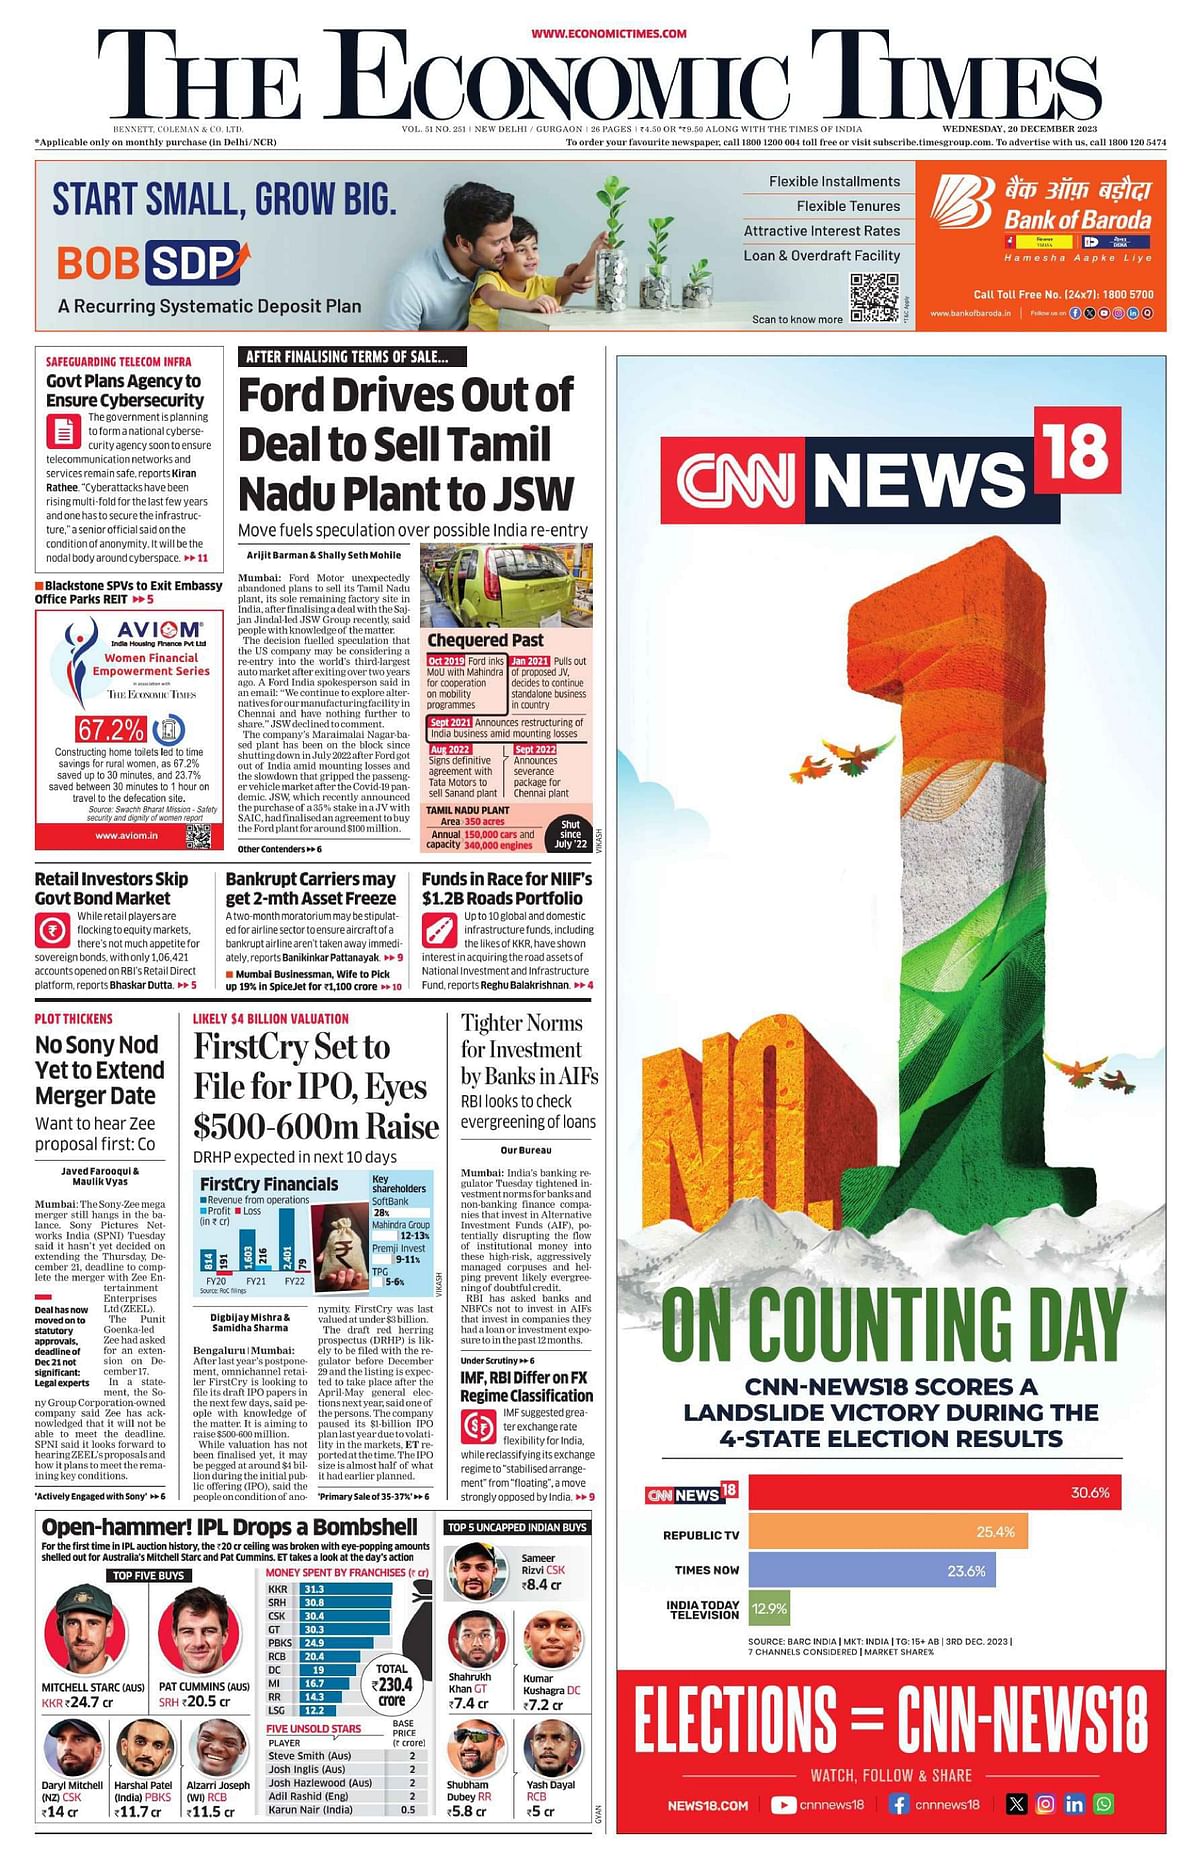 CNN-News18 launches print campaign to announce counting day coverage